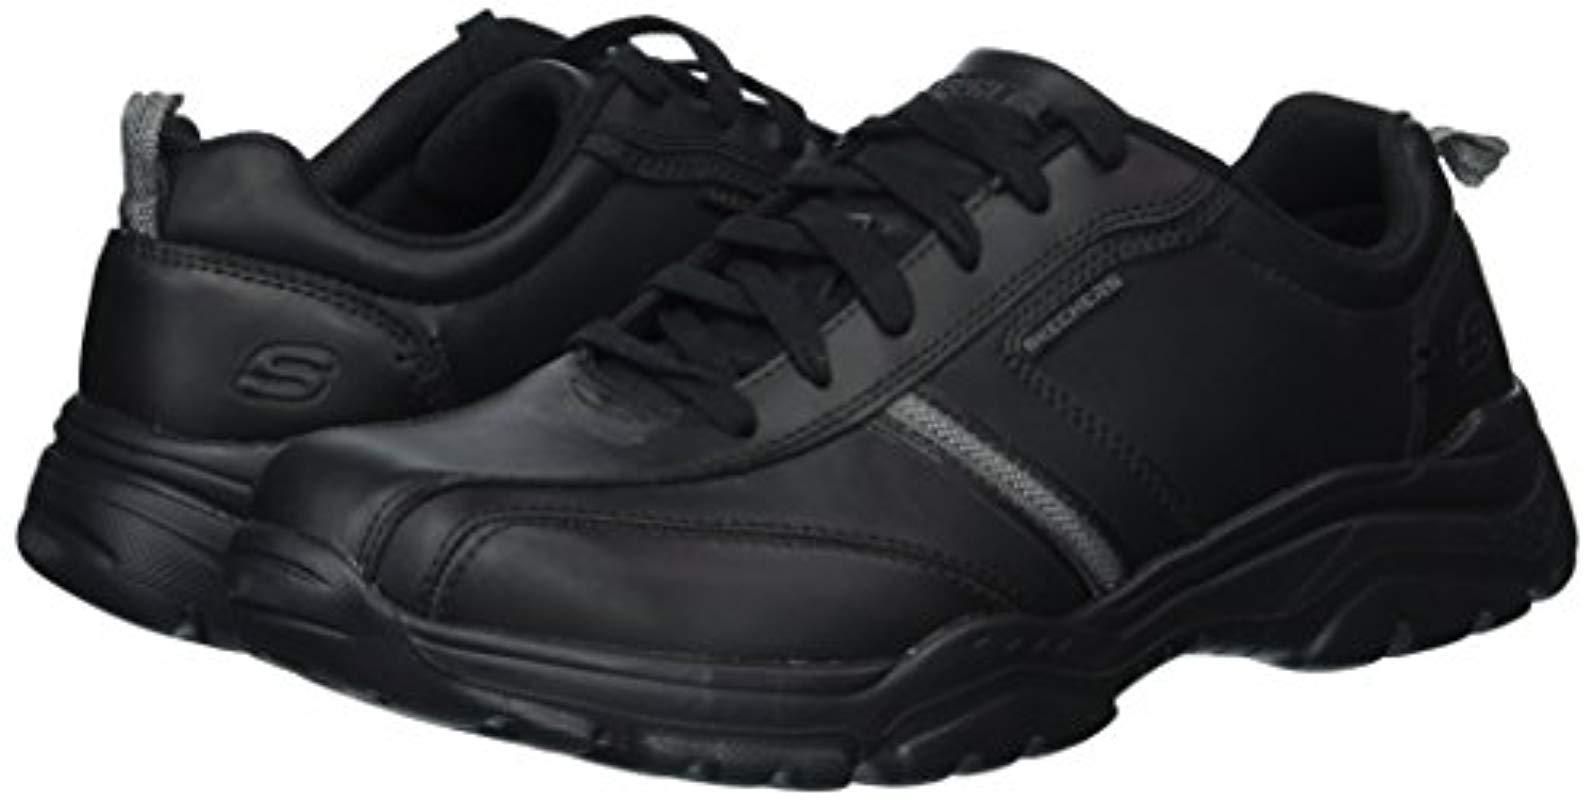 Skechers Leather Relaxed Fit-rovato-larion Oxford in Black 7 (Black) for  Men - Lyst